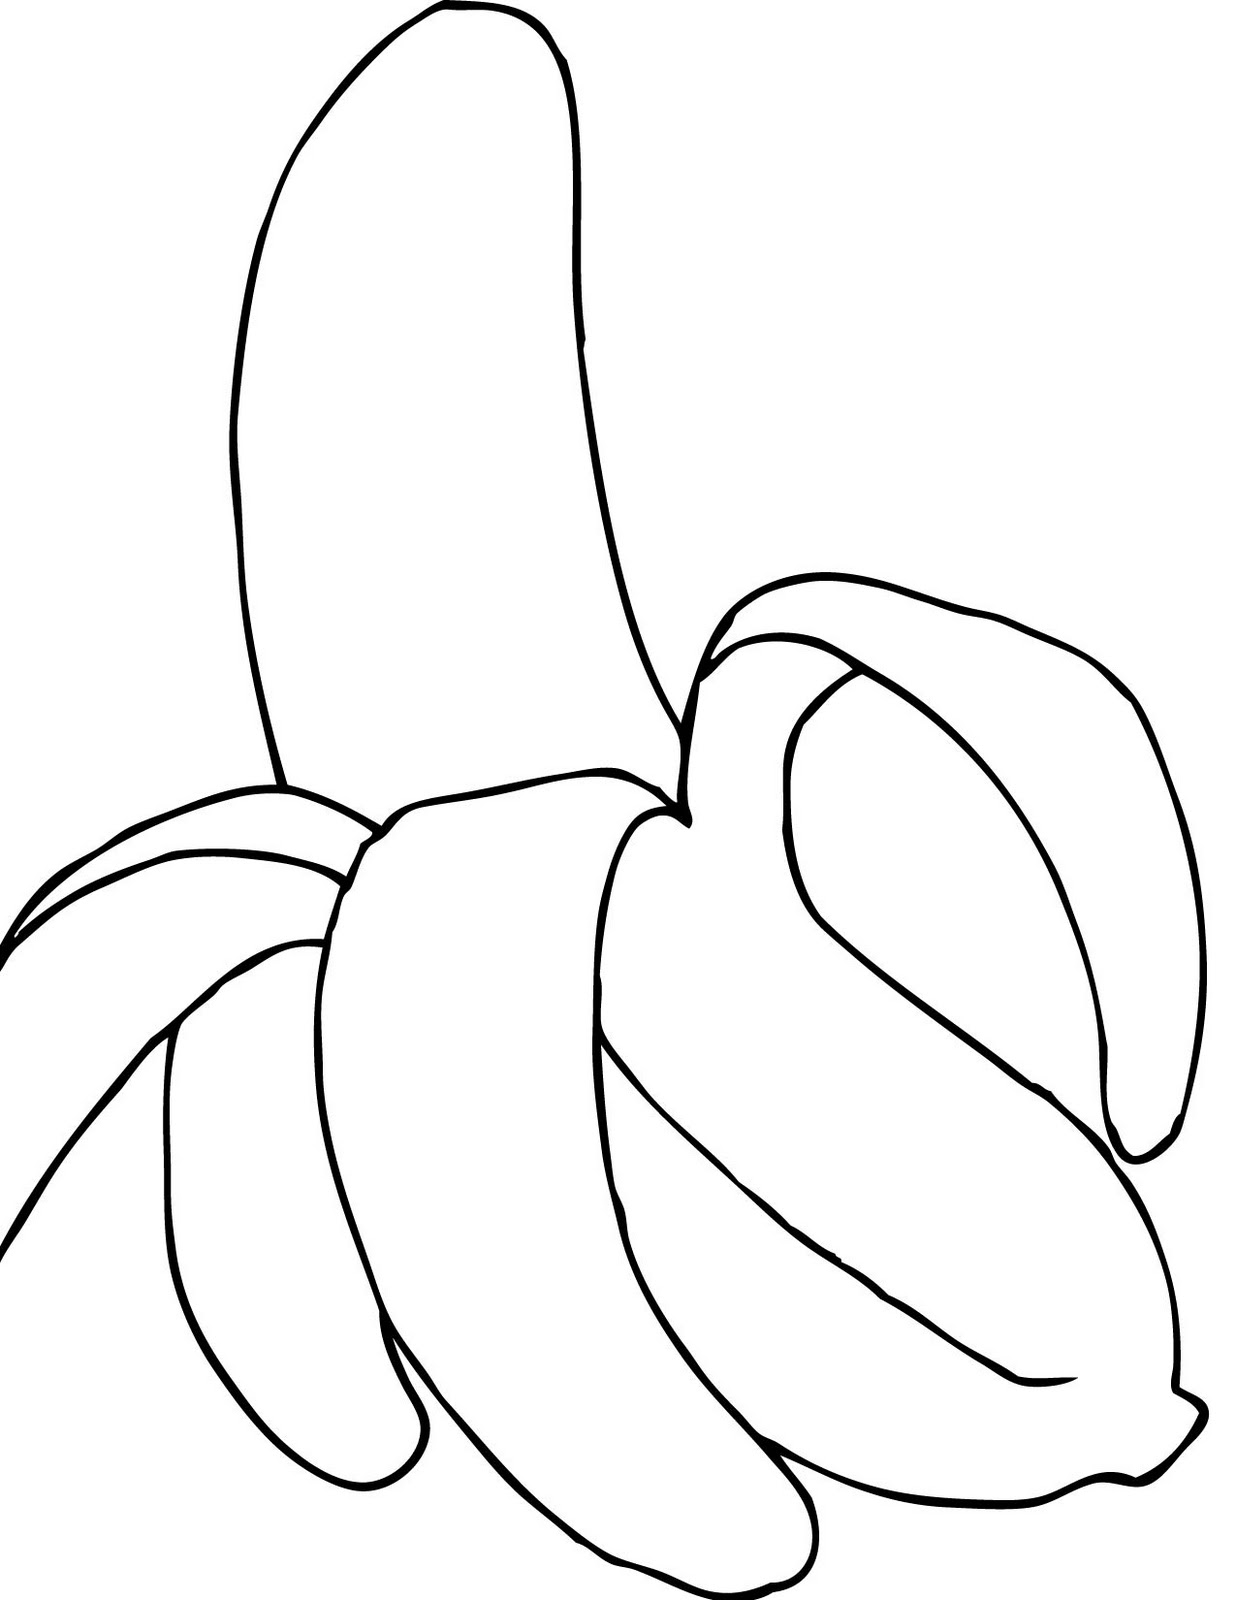 Bananas Coloring Pages Learn To Coloring